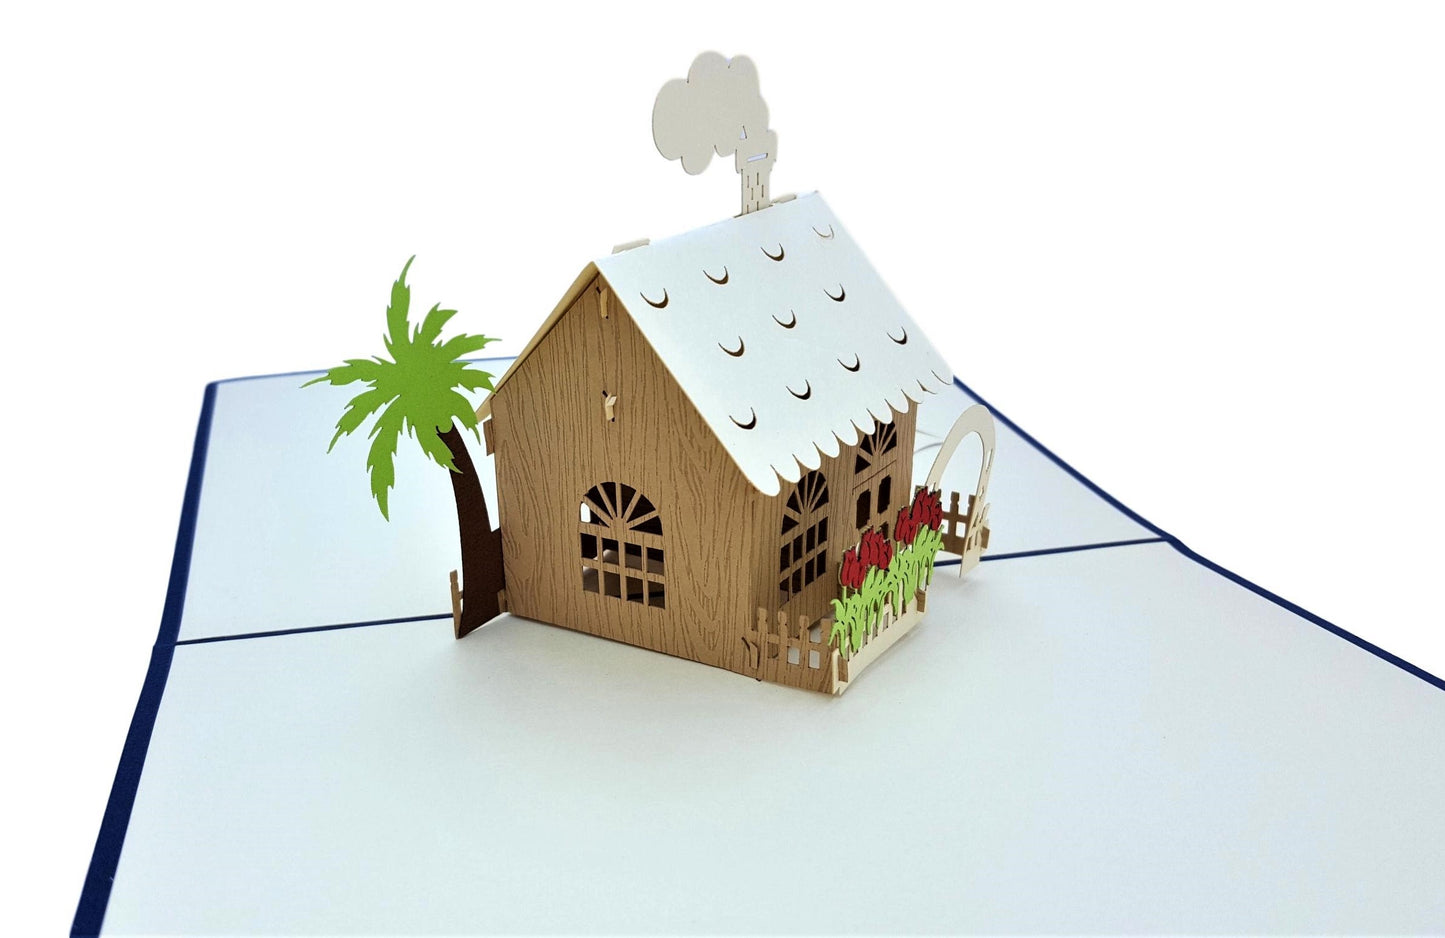 Housewarming 3D Pop Up Greeting Card - Fun - Housewarming - Iconic - Just Because - Special Days - iGifts And Cards